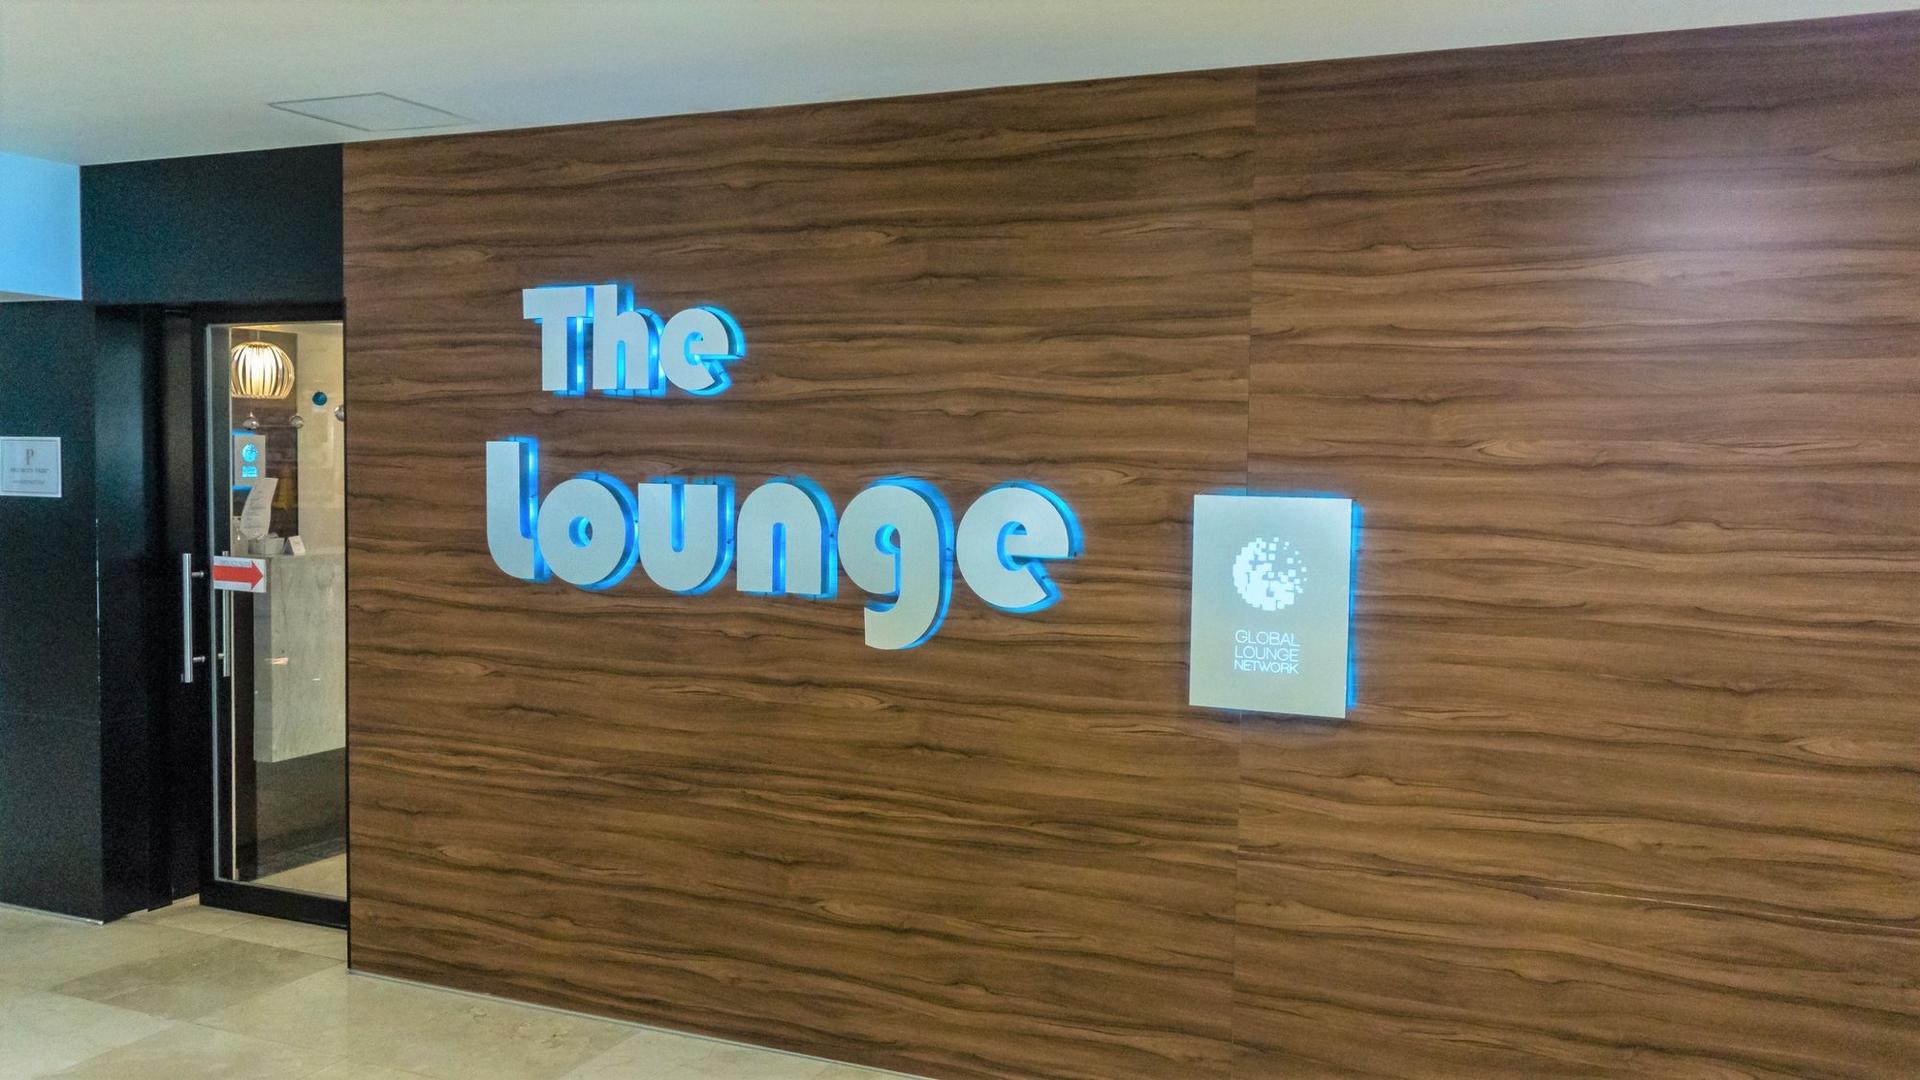 The Lounge By Global Lounge Network image 17 of 19